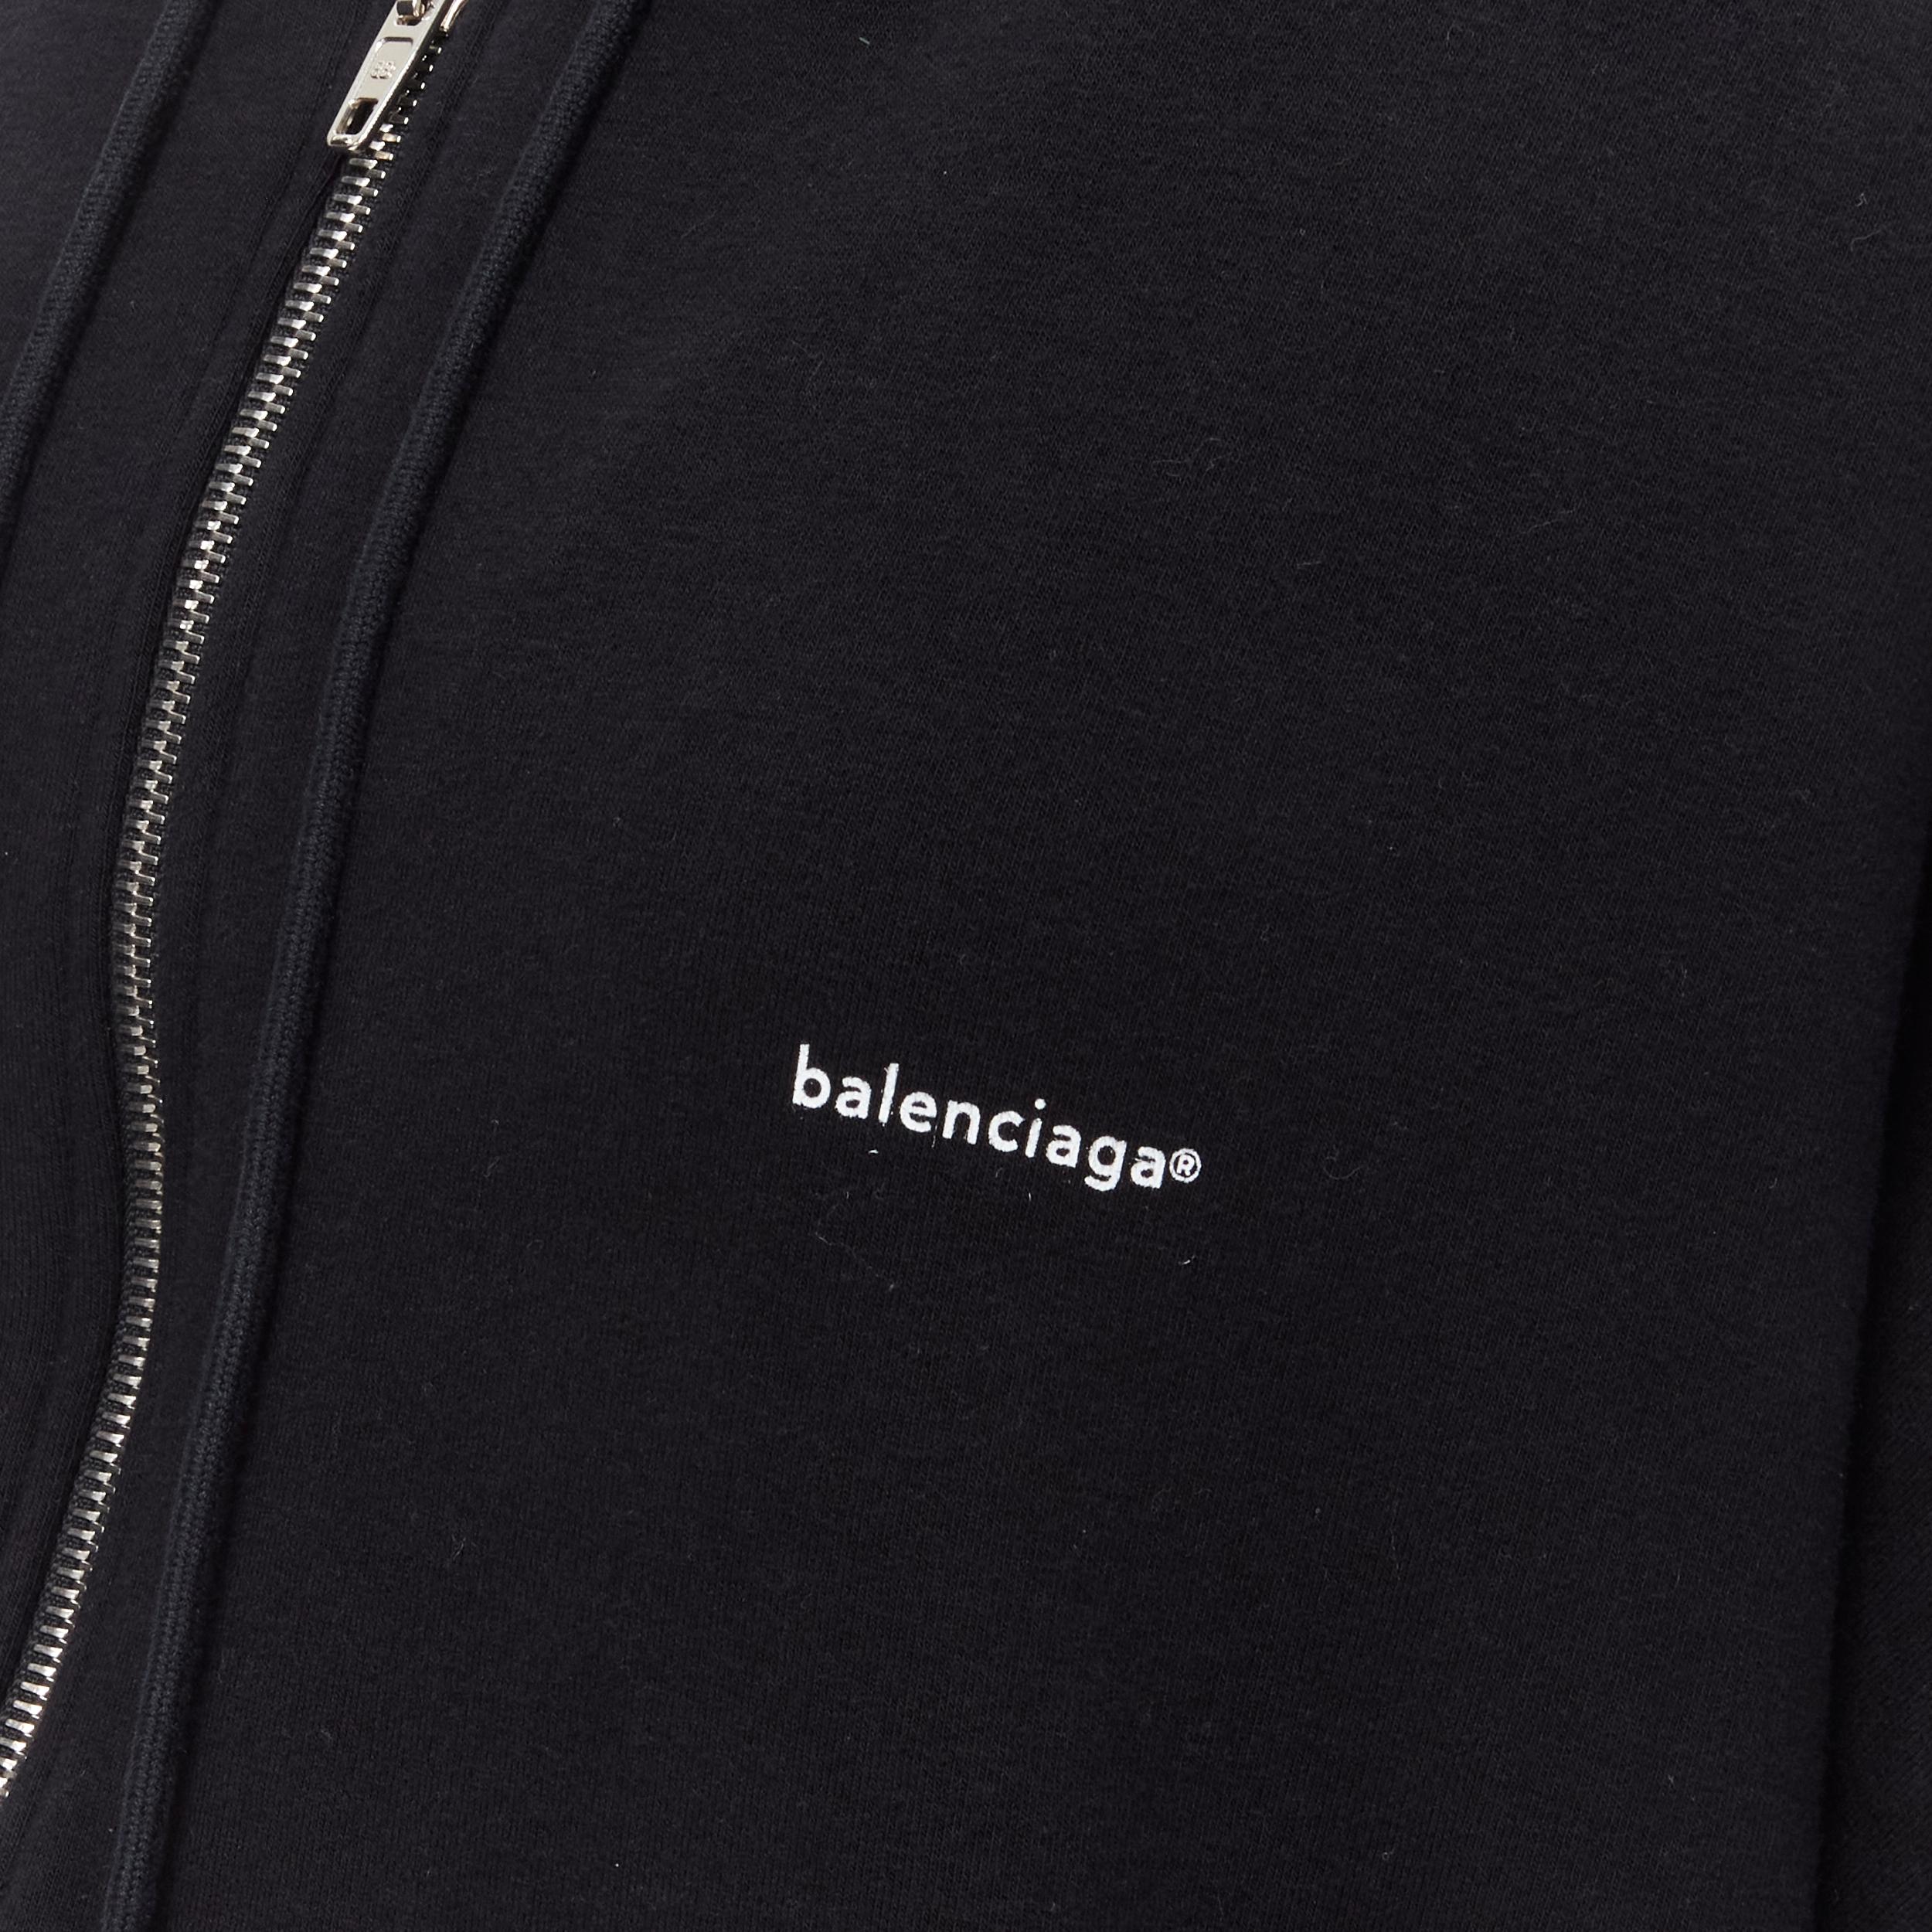 BALENCIAGA 2018 Demna black cotton white logo print oversized zip up hoodie M 
Reference: MELK/A00027
Brand: Balenciaga 
Designer: Demna 
Collection: 2018 
Material: Cotton 
Color: Black 
Pattern: Solid 
Closure: Zip 
Extra Detail: BB logo on